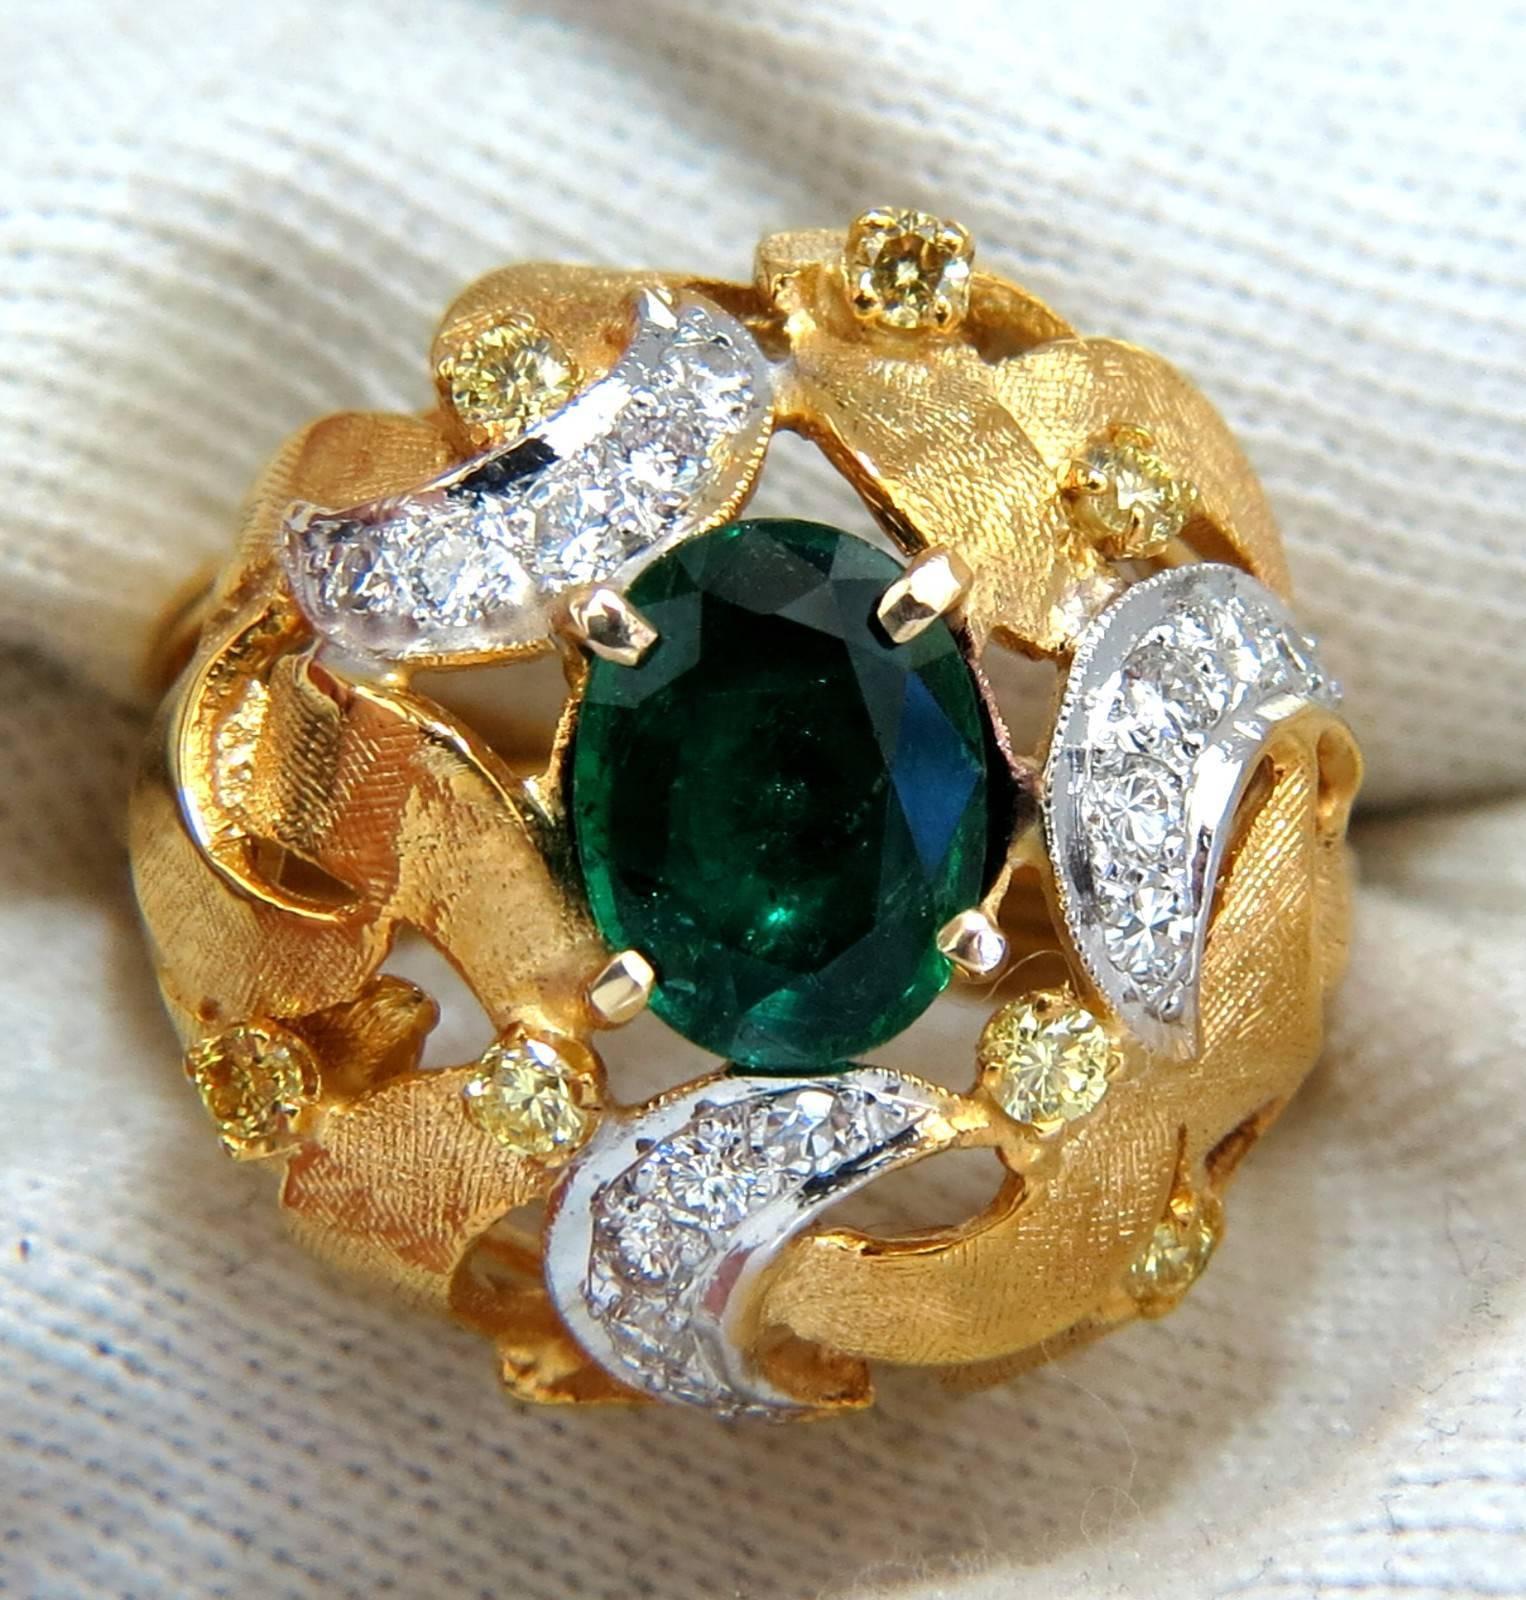 European Florentine Interwined

1.35ct. Natural Emerald Ring

9 X 7mm

Transparent & Vivid Green 

.28ct. natural yellow Diamonds.

.45ct. white diamonds.

Round & full cuts 

G-color Vs-2 clarity.  

14kt. yellow gold

11.6 grams

Ring Current